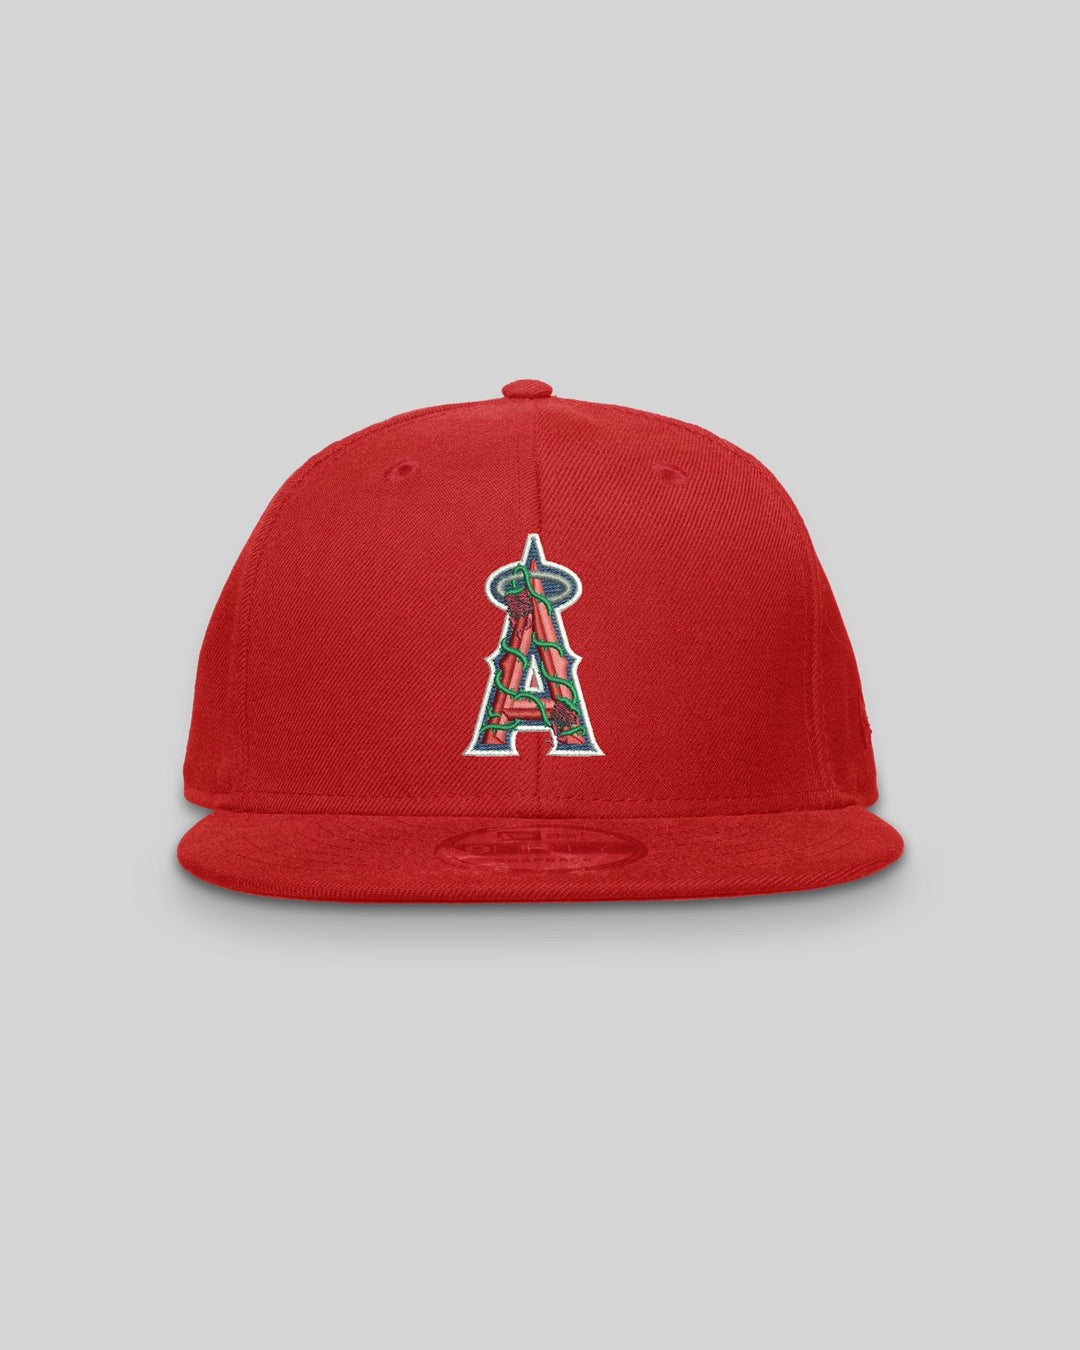 Angels City Rose New Era Red Snapback - trainofthoughtcollective